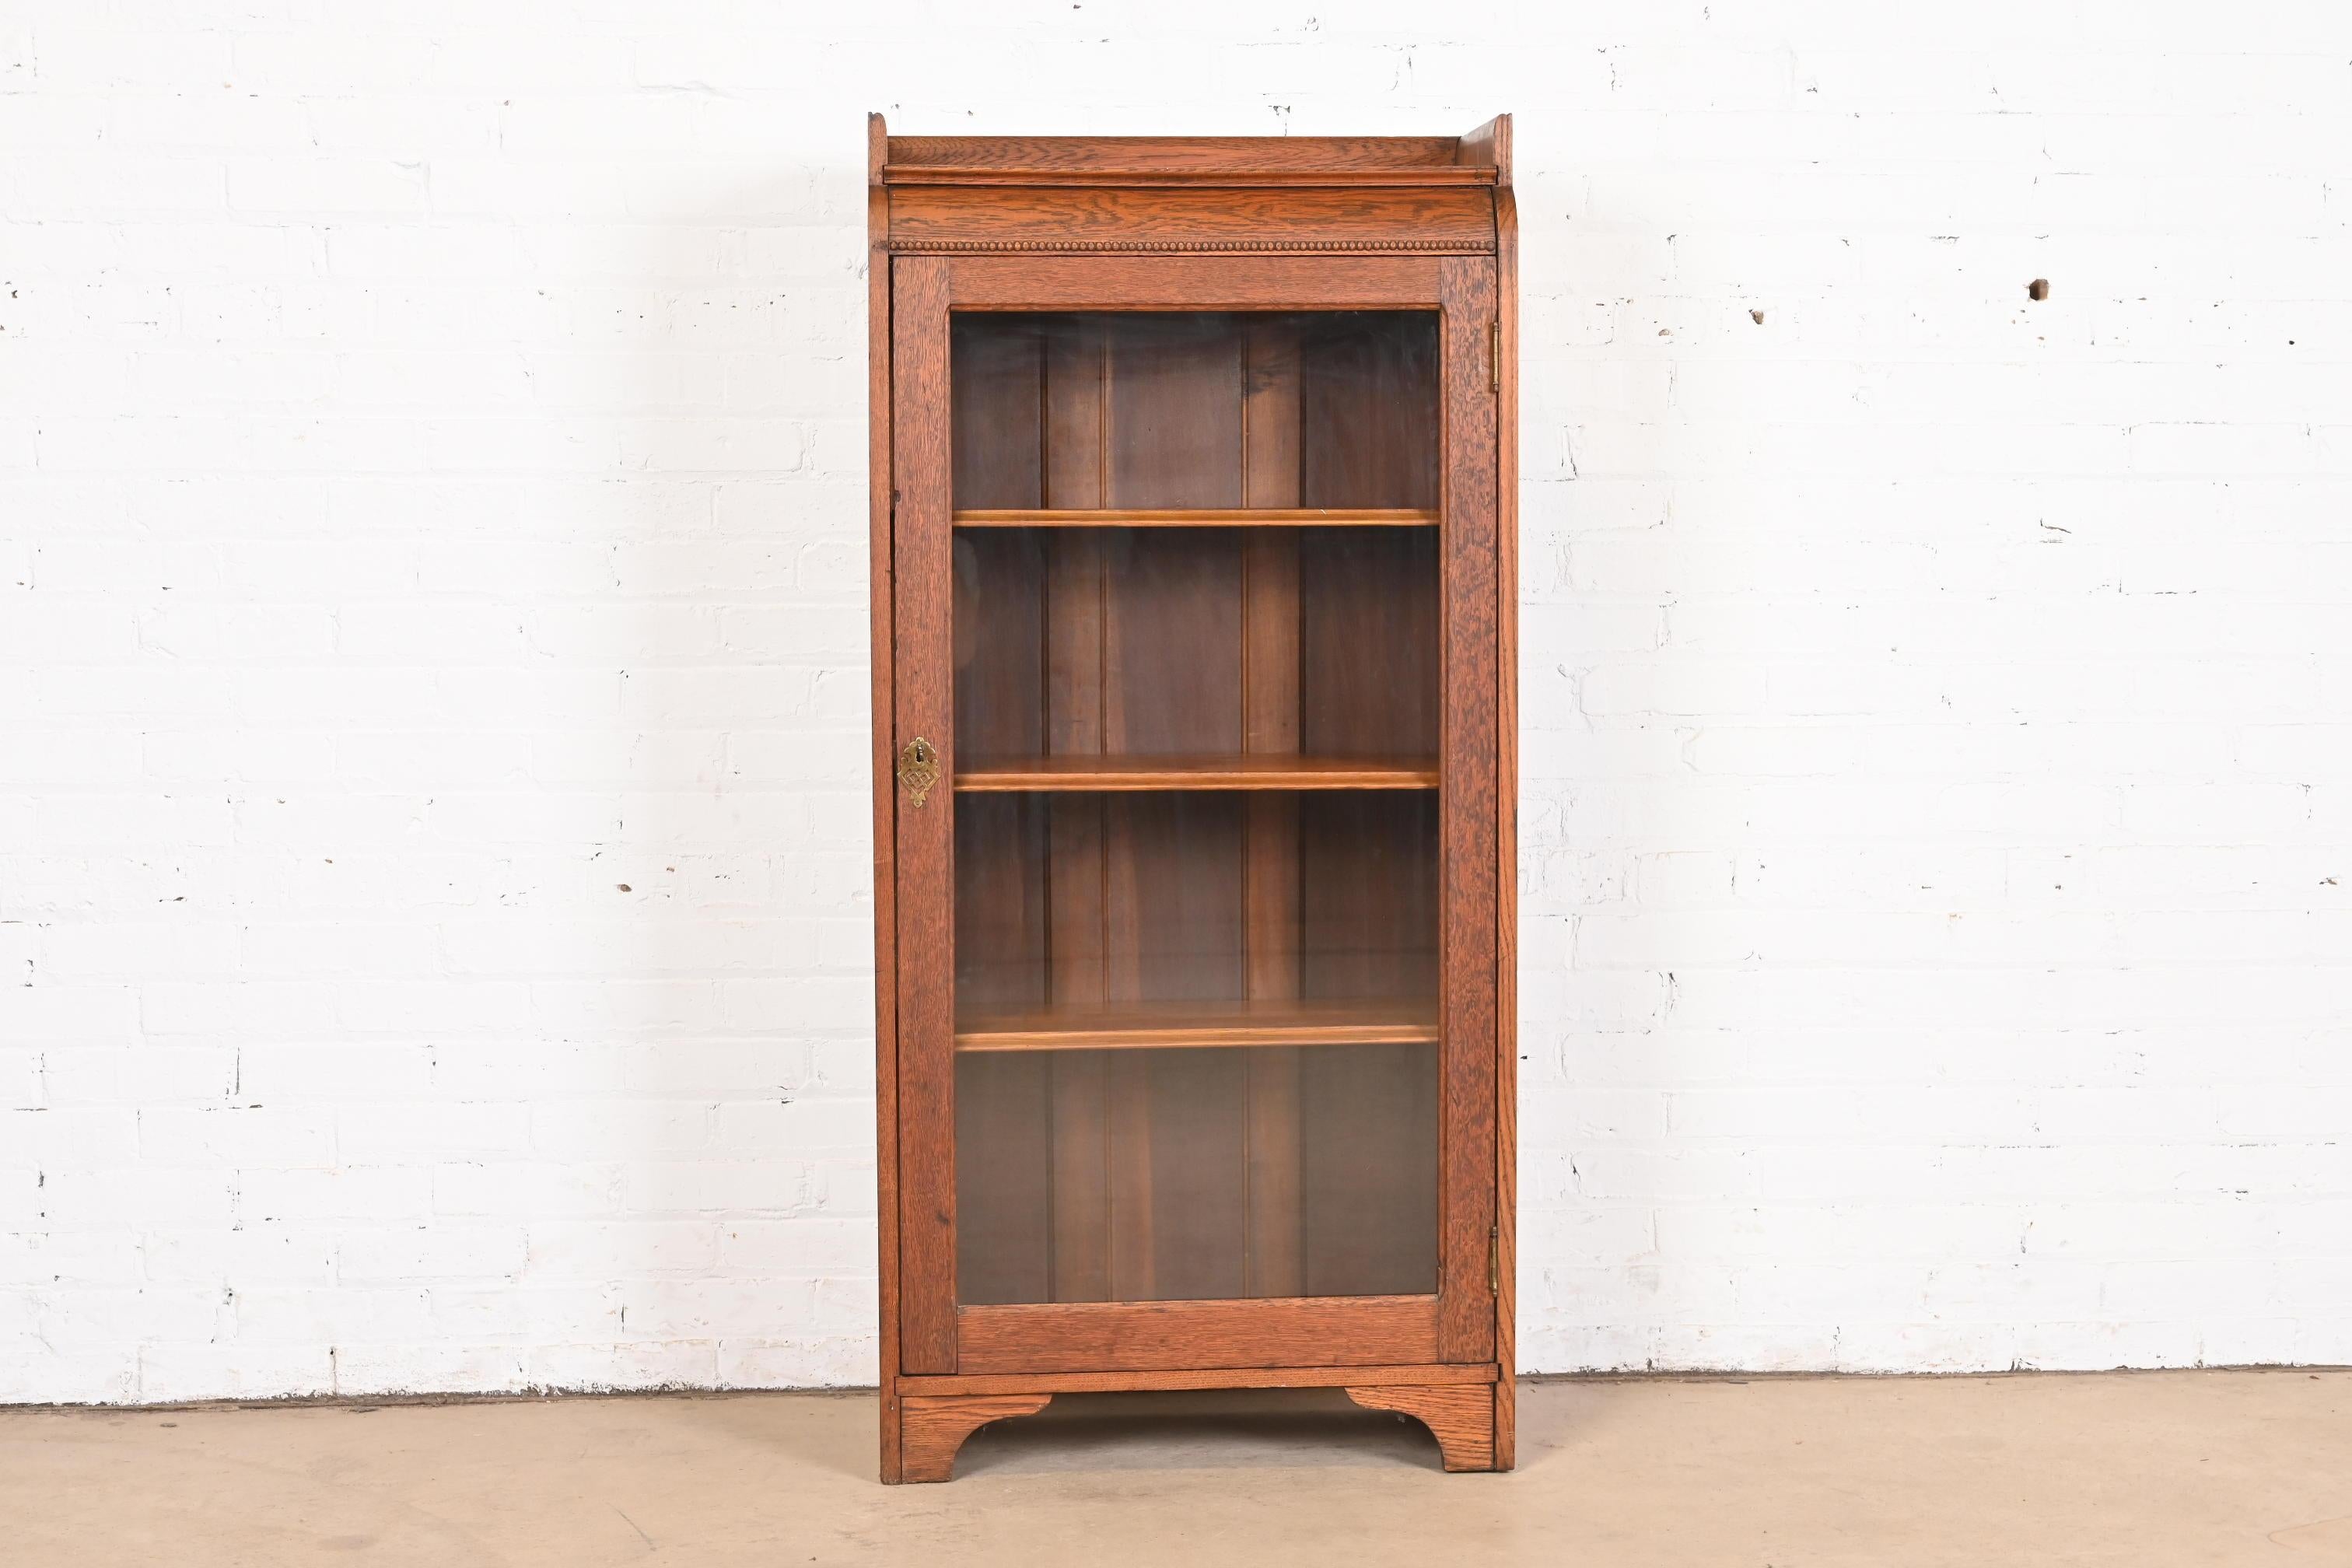 A gorgeous antique Mission or Arts & Crafts bookcase cabinet

In the manner of Stickley Brothers

USA, Circa 1900

Solid oak, with glass front door and original brass hardware. Cabinet locks, and key is included.

Measures: 25.5